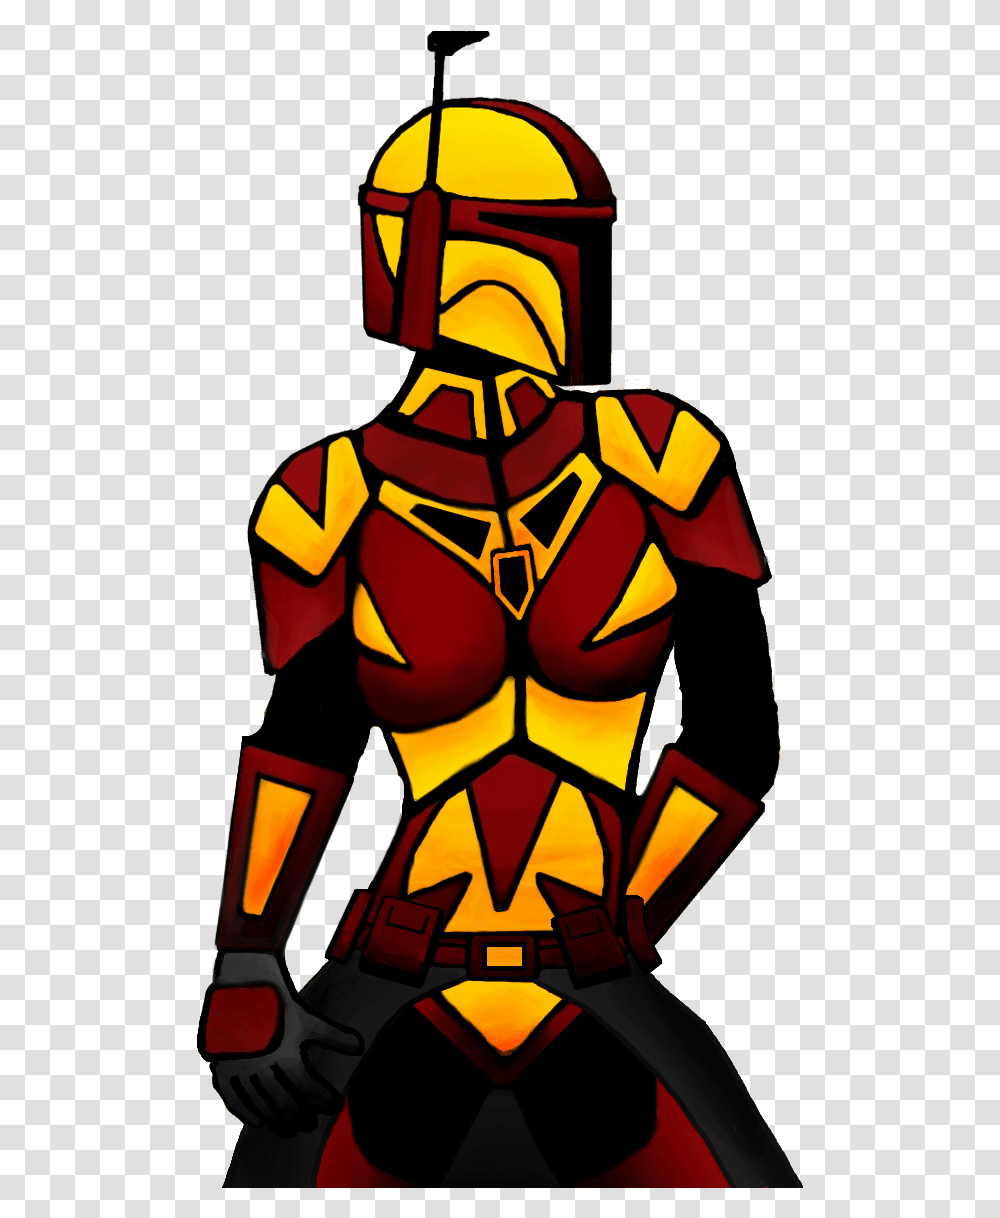 Download Hd Tg Traditional Games Search Offset Black And Orange Mandalorian Armor, Art, Halloween, Hand, Graphics Transparent Png